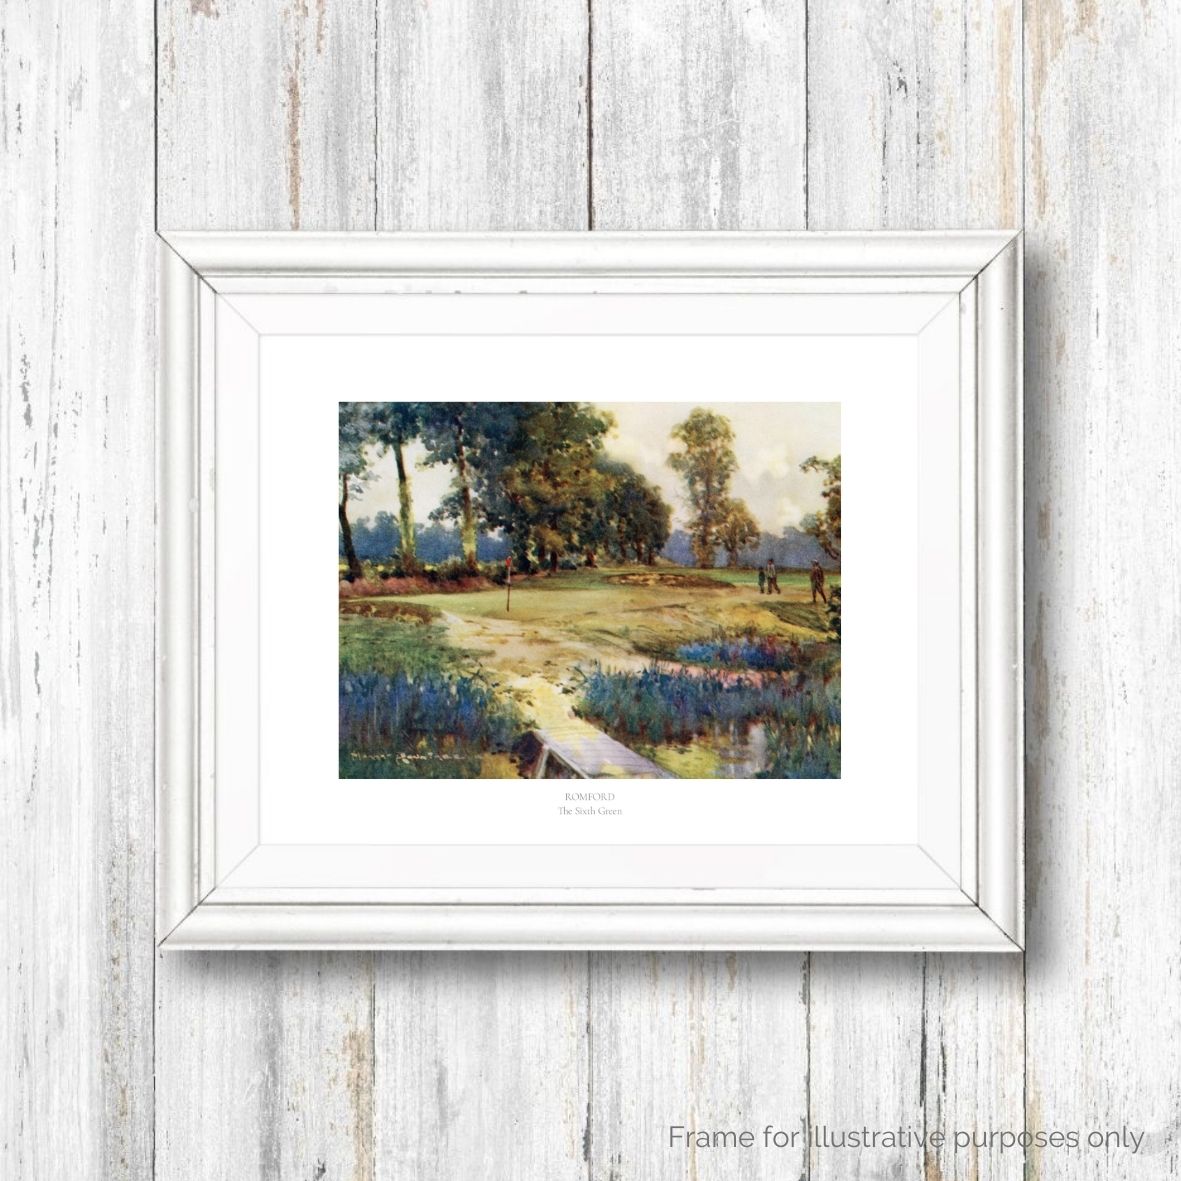 Romford Golf Club framed print with text by Harry Rountree